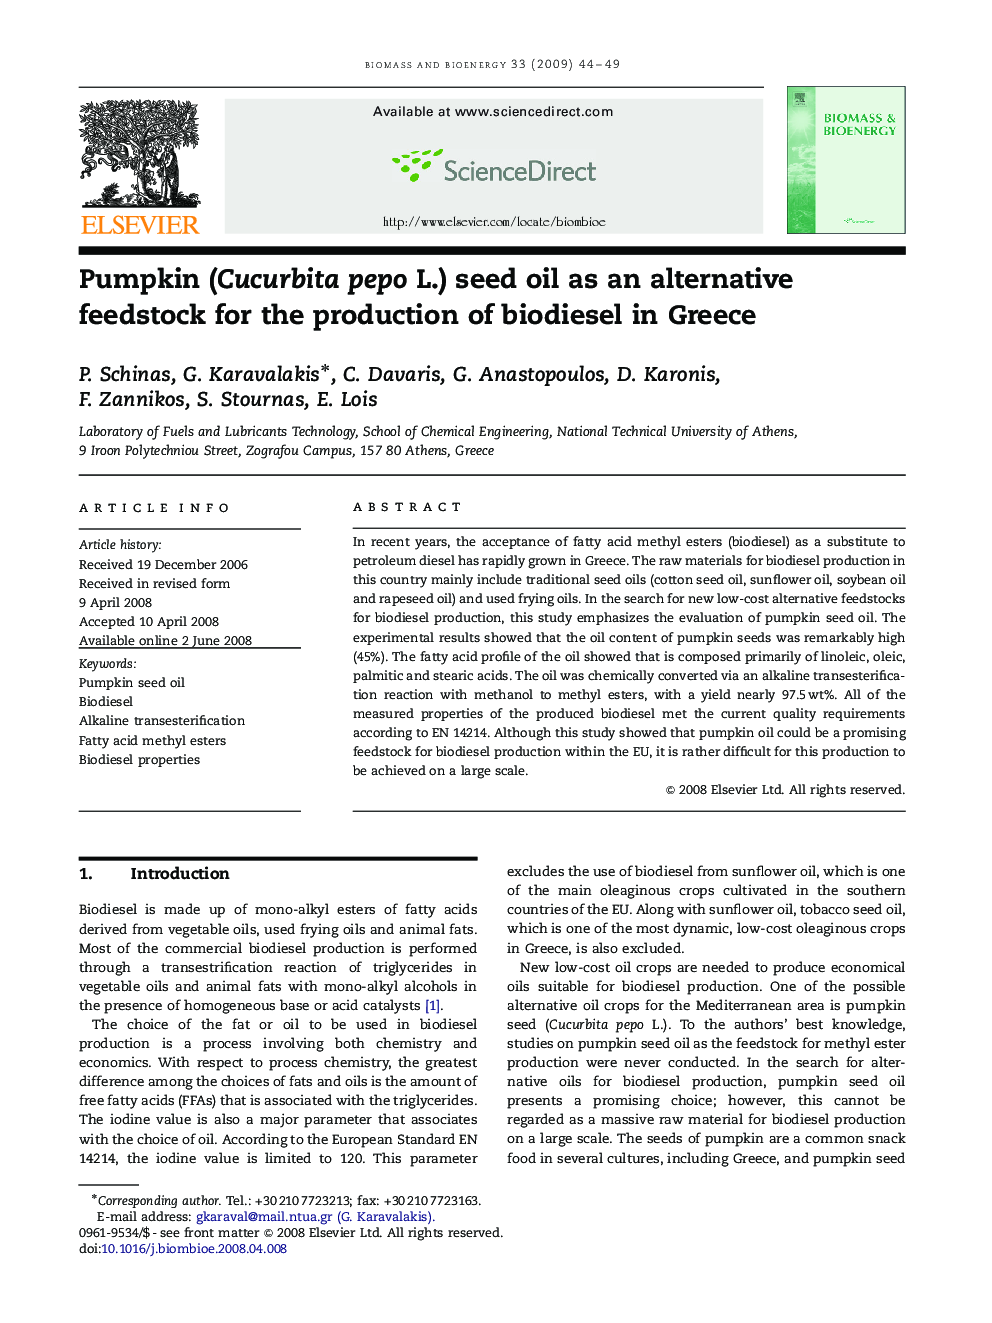 Pumpkin (Cucurbita pepo L.) seed oil as an alternative feedstock for the production of biodiesel in Greece